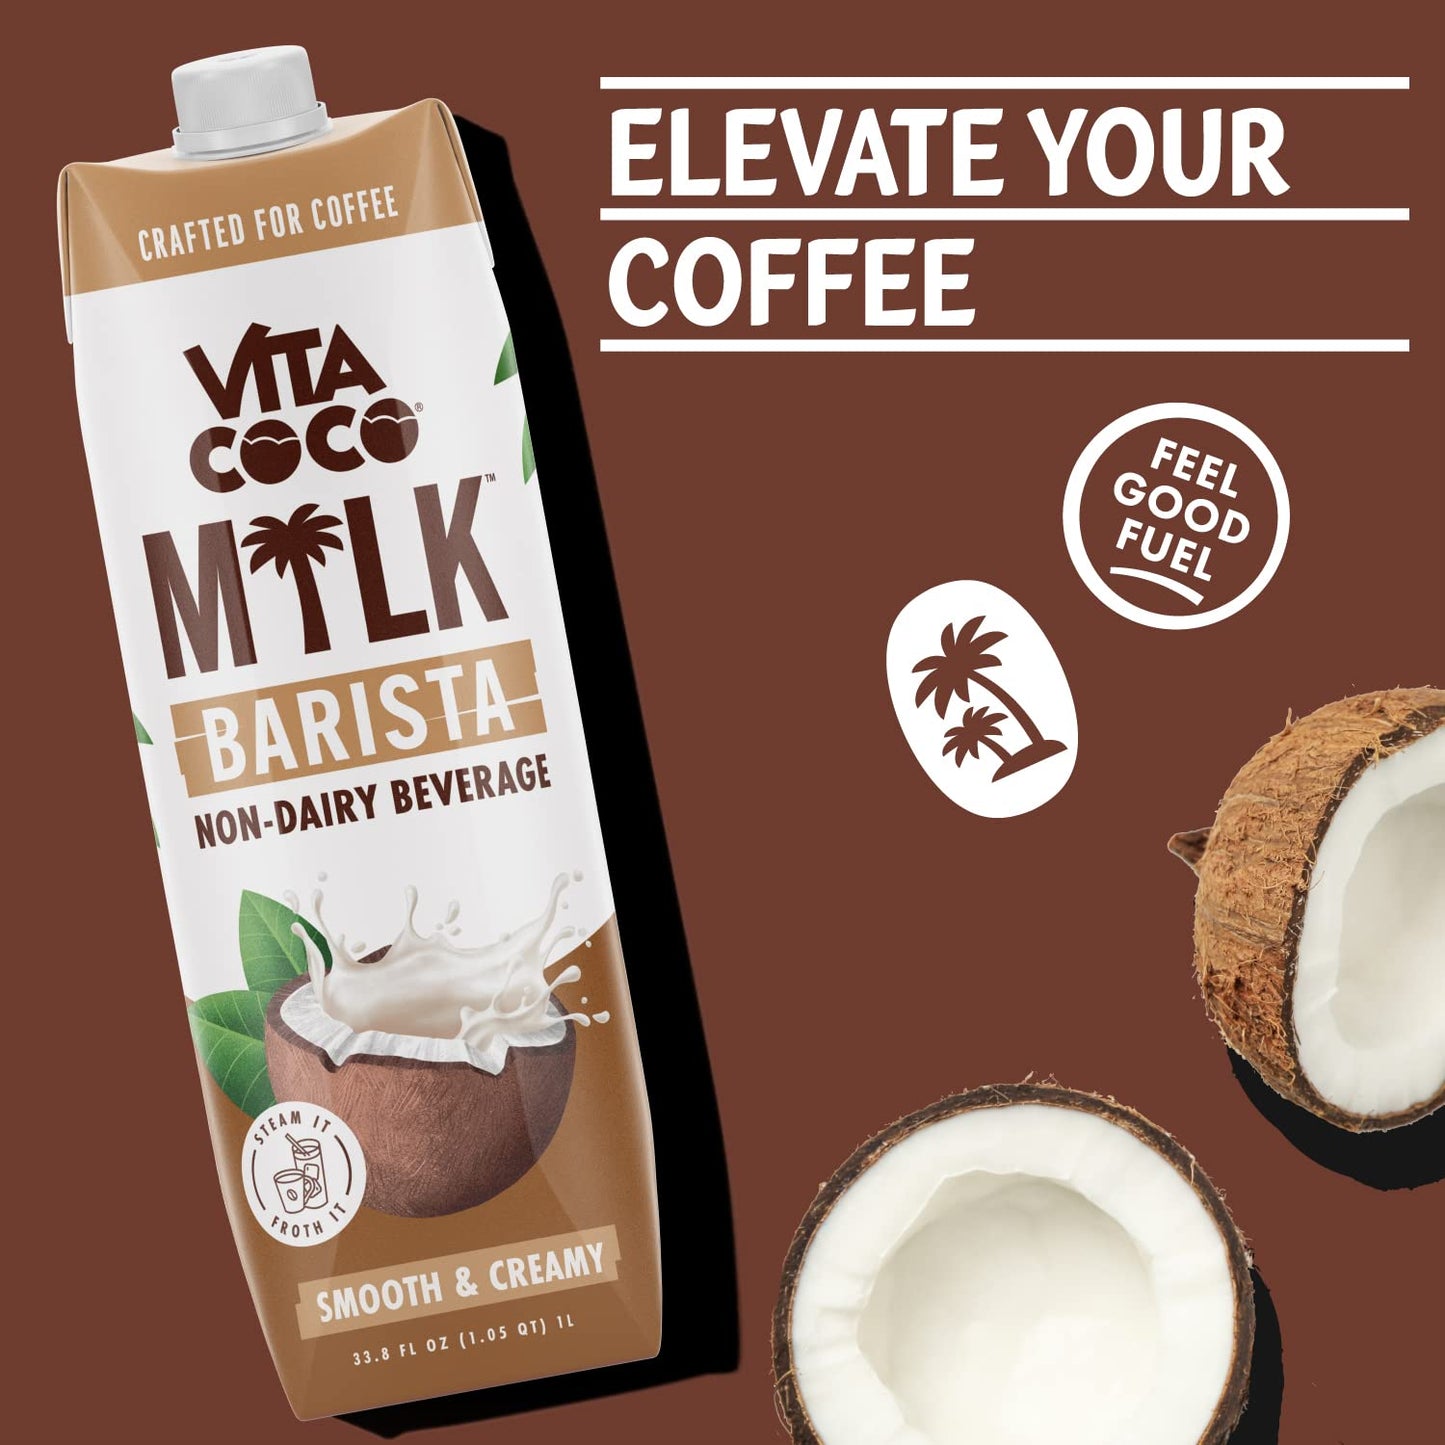 Vita Coco Barista Milk - Plant Based, Dairy Free Milk Alternative - Gluten Free, Soy Free, and Unsweetened - Perfect Add to Coffee, Matcha, Pink Drinks - 33.8 Fl Oz (Pack of 6)